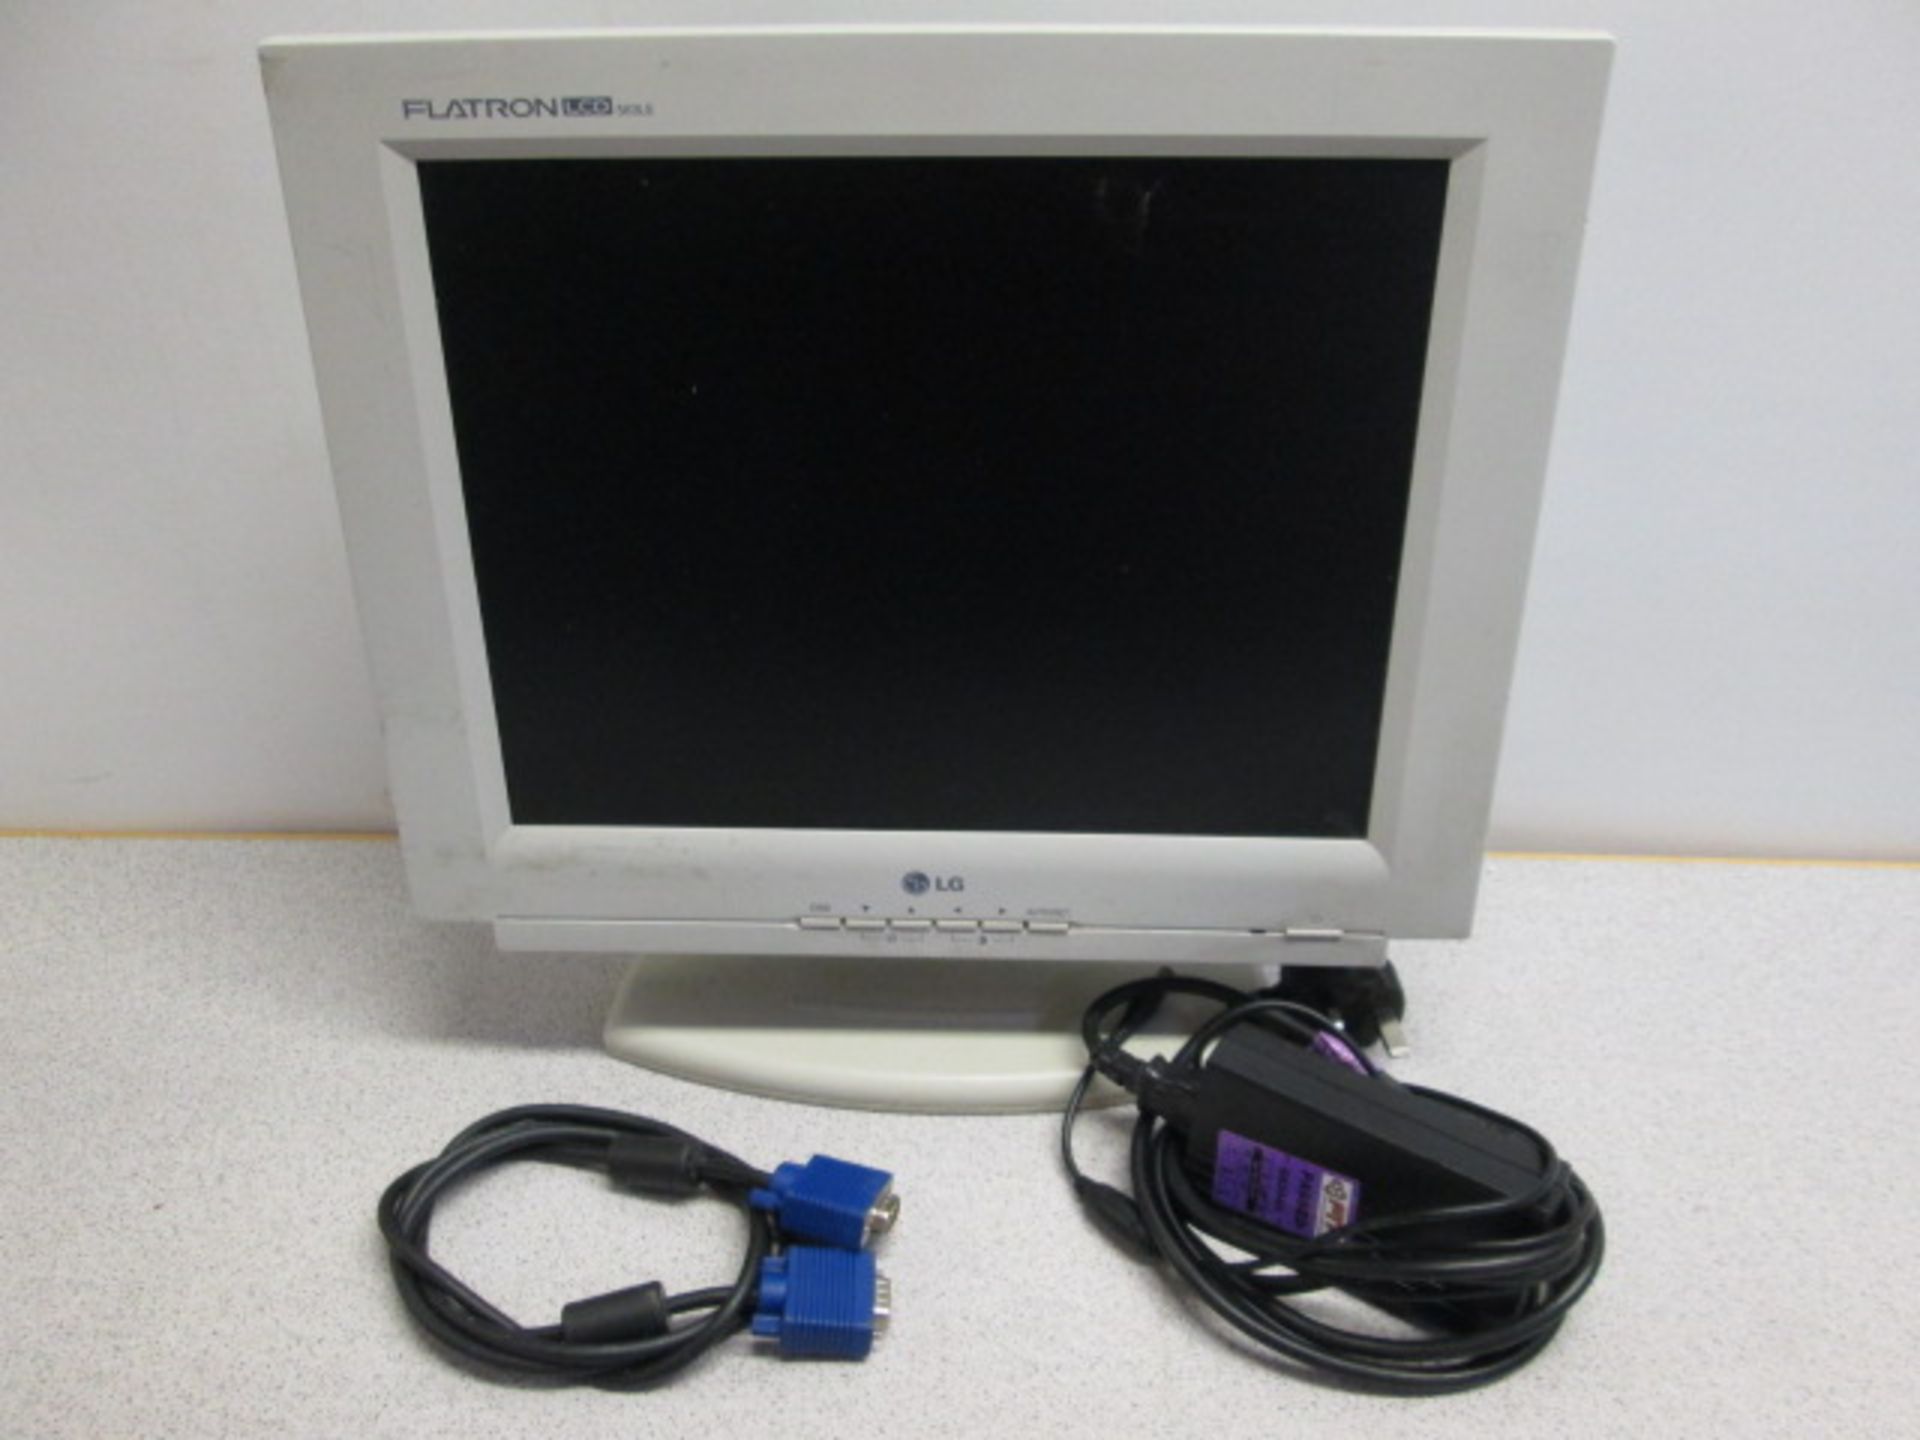 LG Flatron 15" LCD Monitor. Model 563LE with Power Supply & VGA Cable.